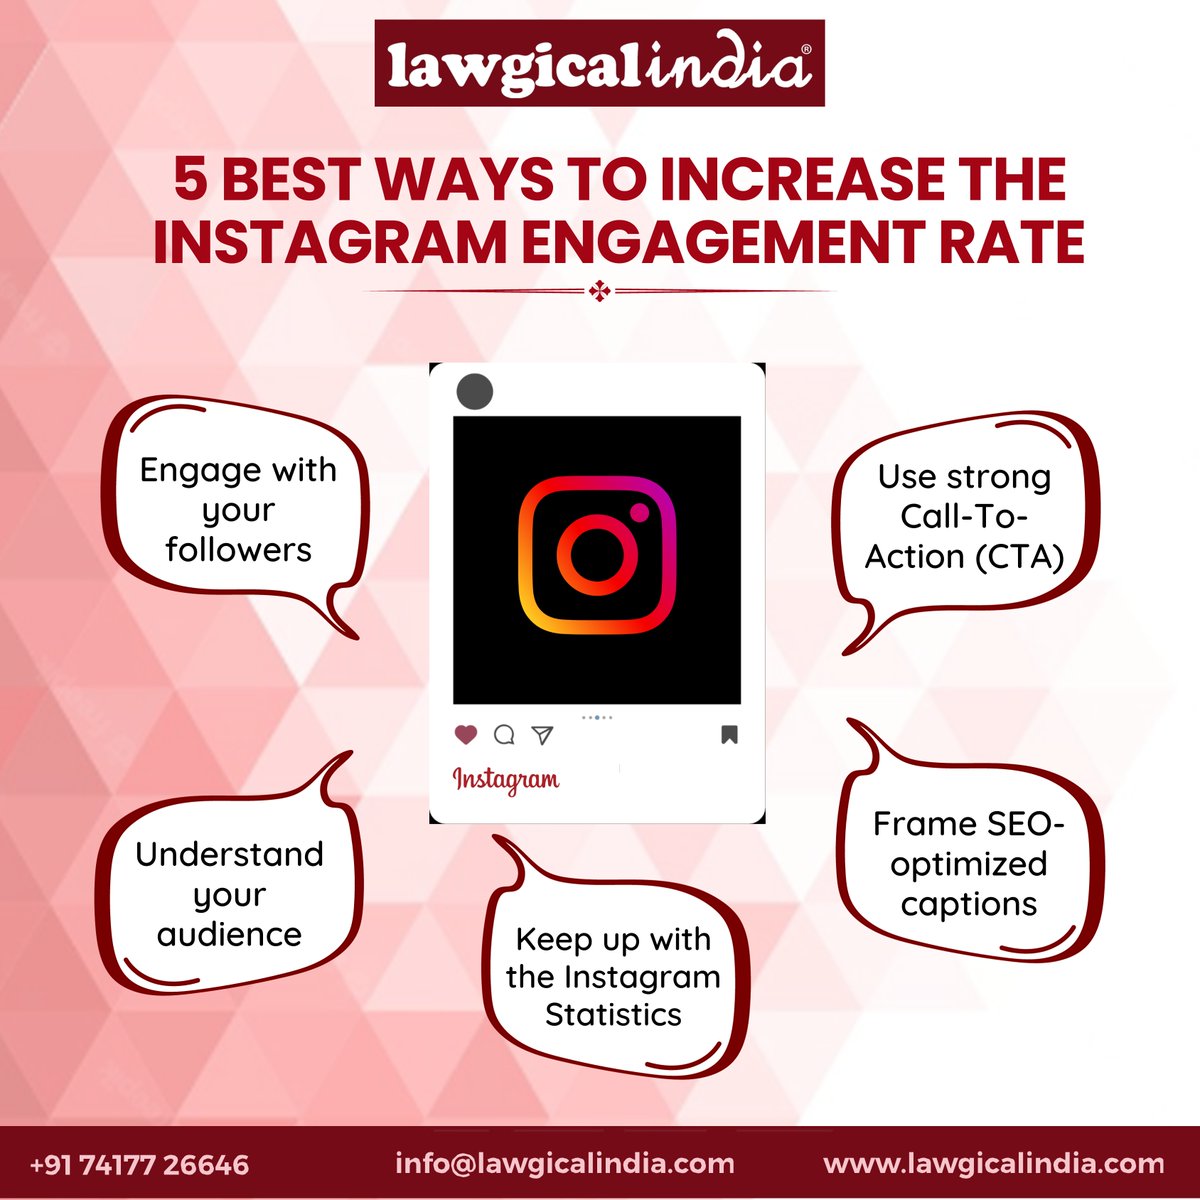 To make you win the game of Engagement, you can trust LawgicalIndia for digital marketing and other business services such as MSME registration, GST registration and beyond.

#engagement #msme #instagram #influencer #engagementrate #cta #digitalmarketing #seo #audience #seo